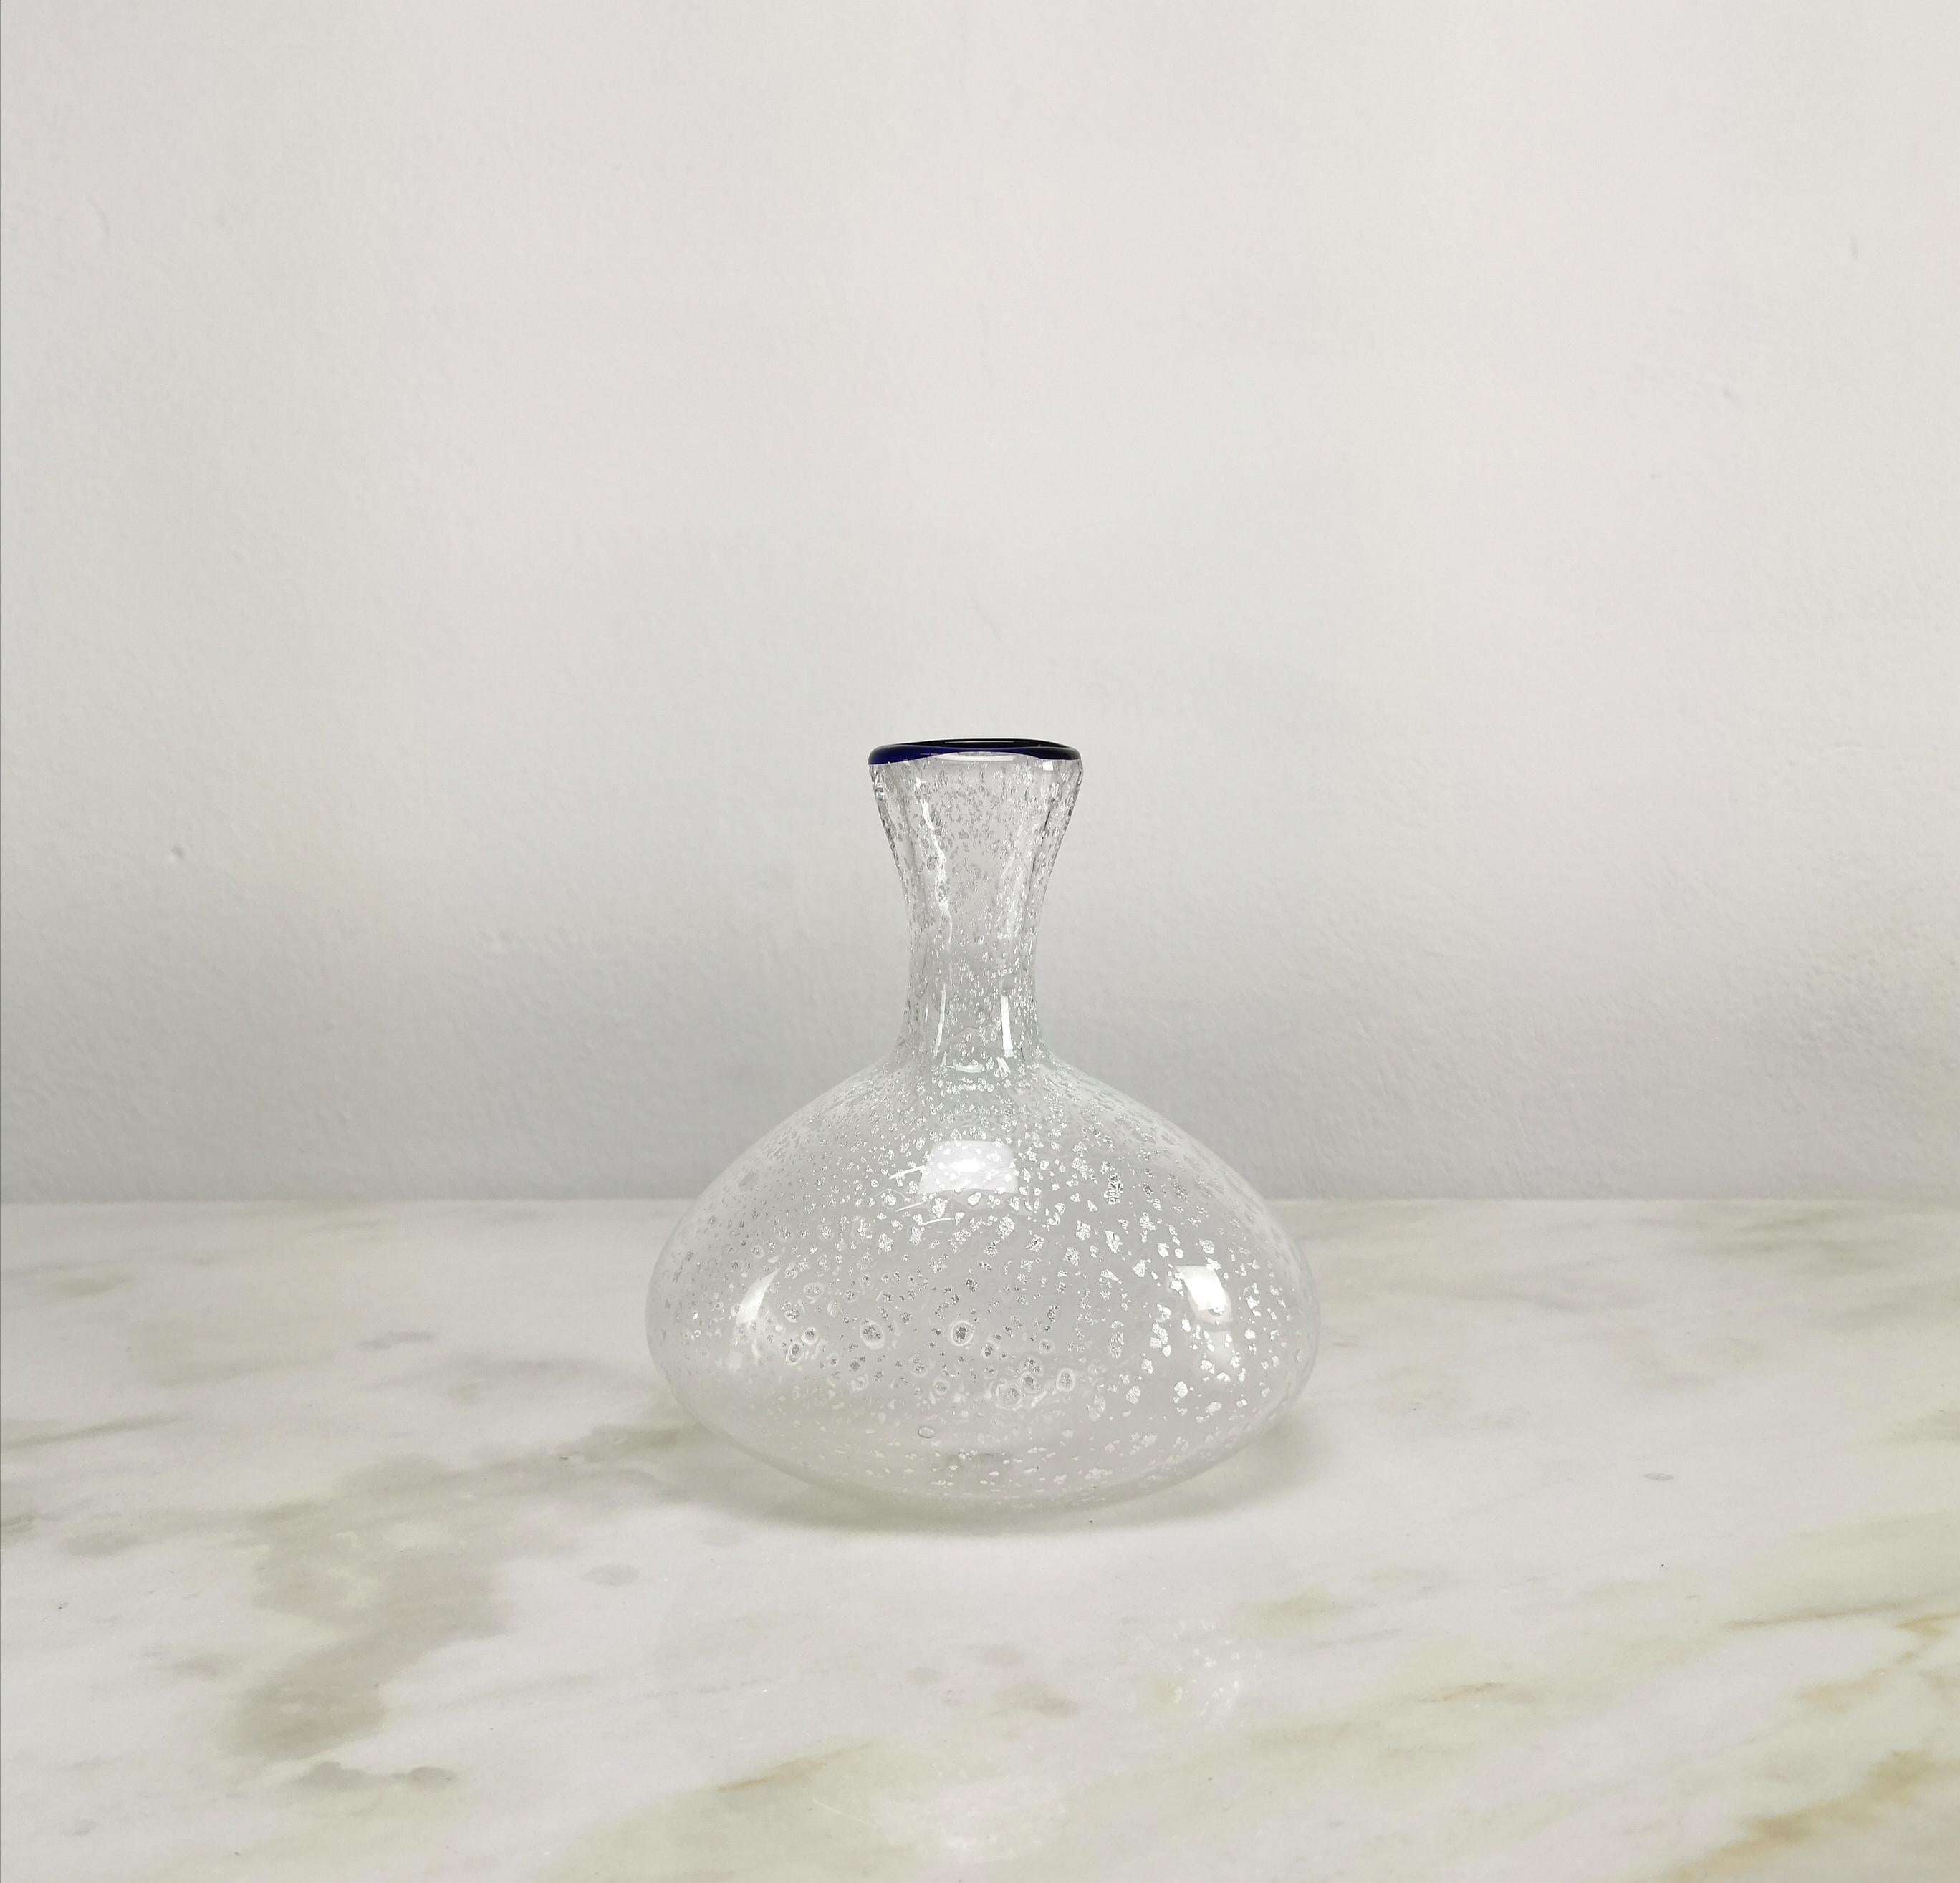 Small ampoule-like vase with a narrow neck made of transparent and speckled Murano glass with a blue border. Made in Italy in the 70s.



Note: We try to offer our customers an excellent service even in shipments all over the world, collaborating